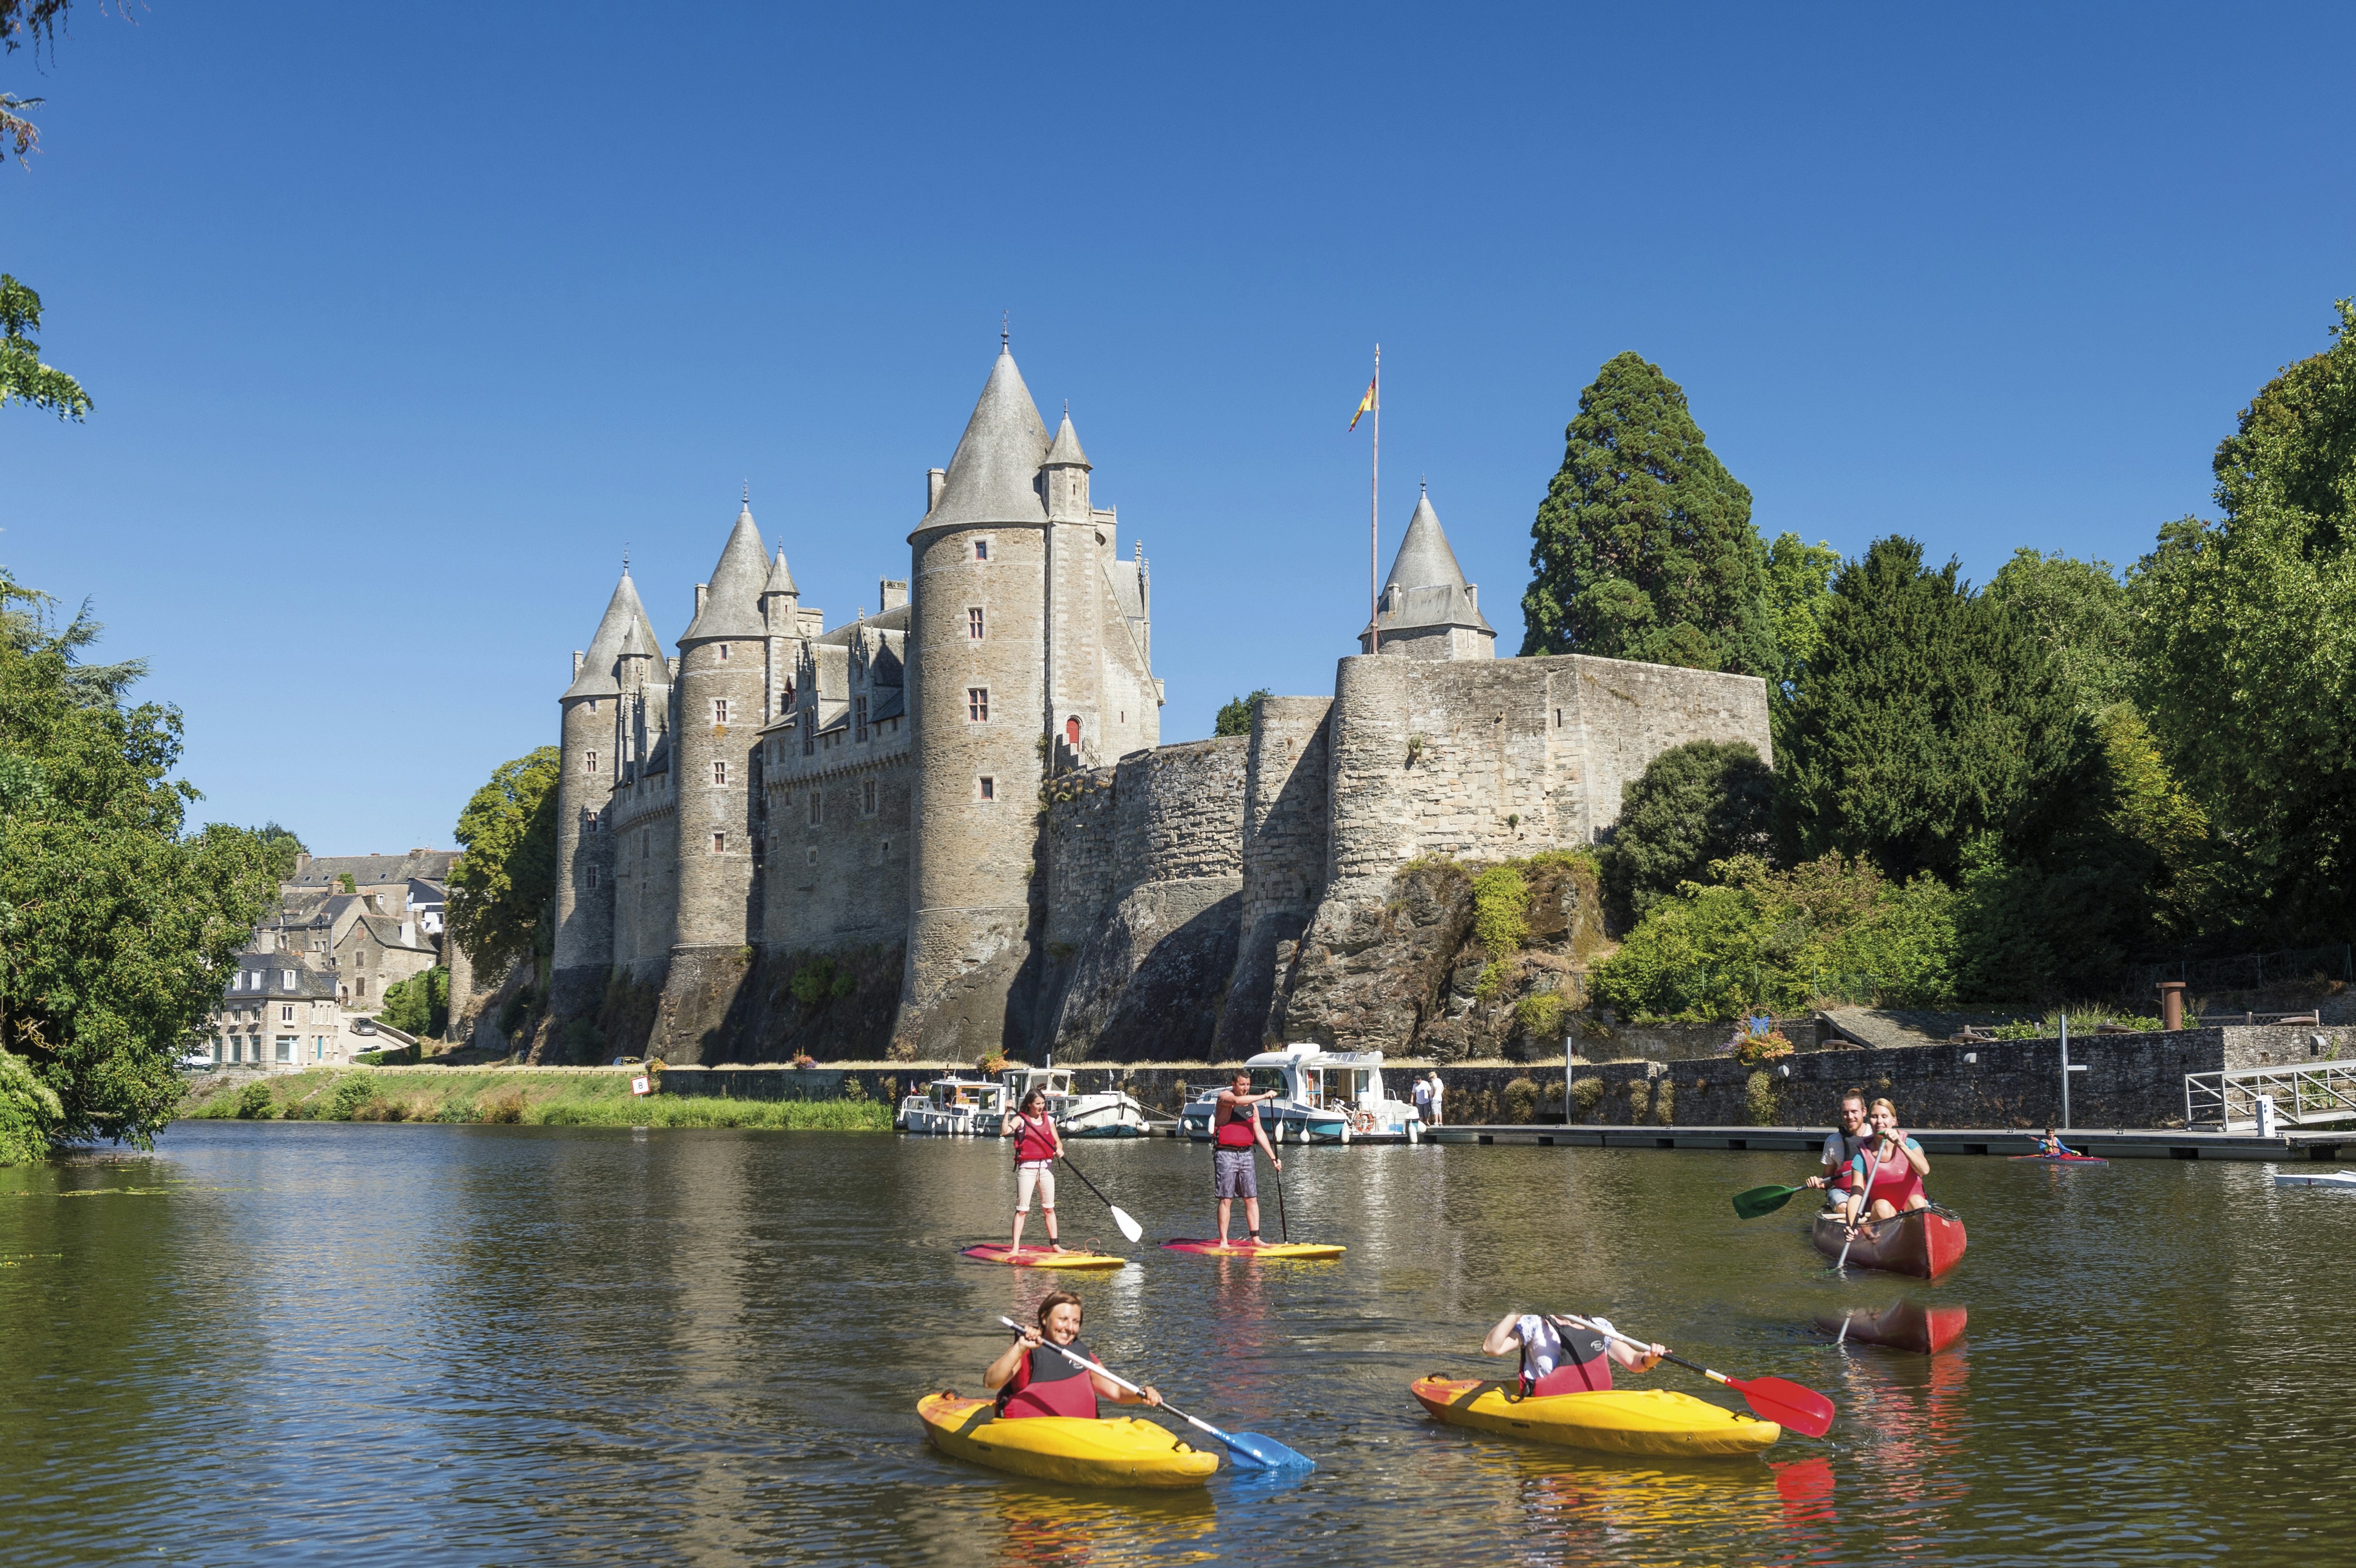 People on paddleboards and in kayaks on a quiet water channel in the foothills of Josselin Castle